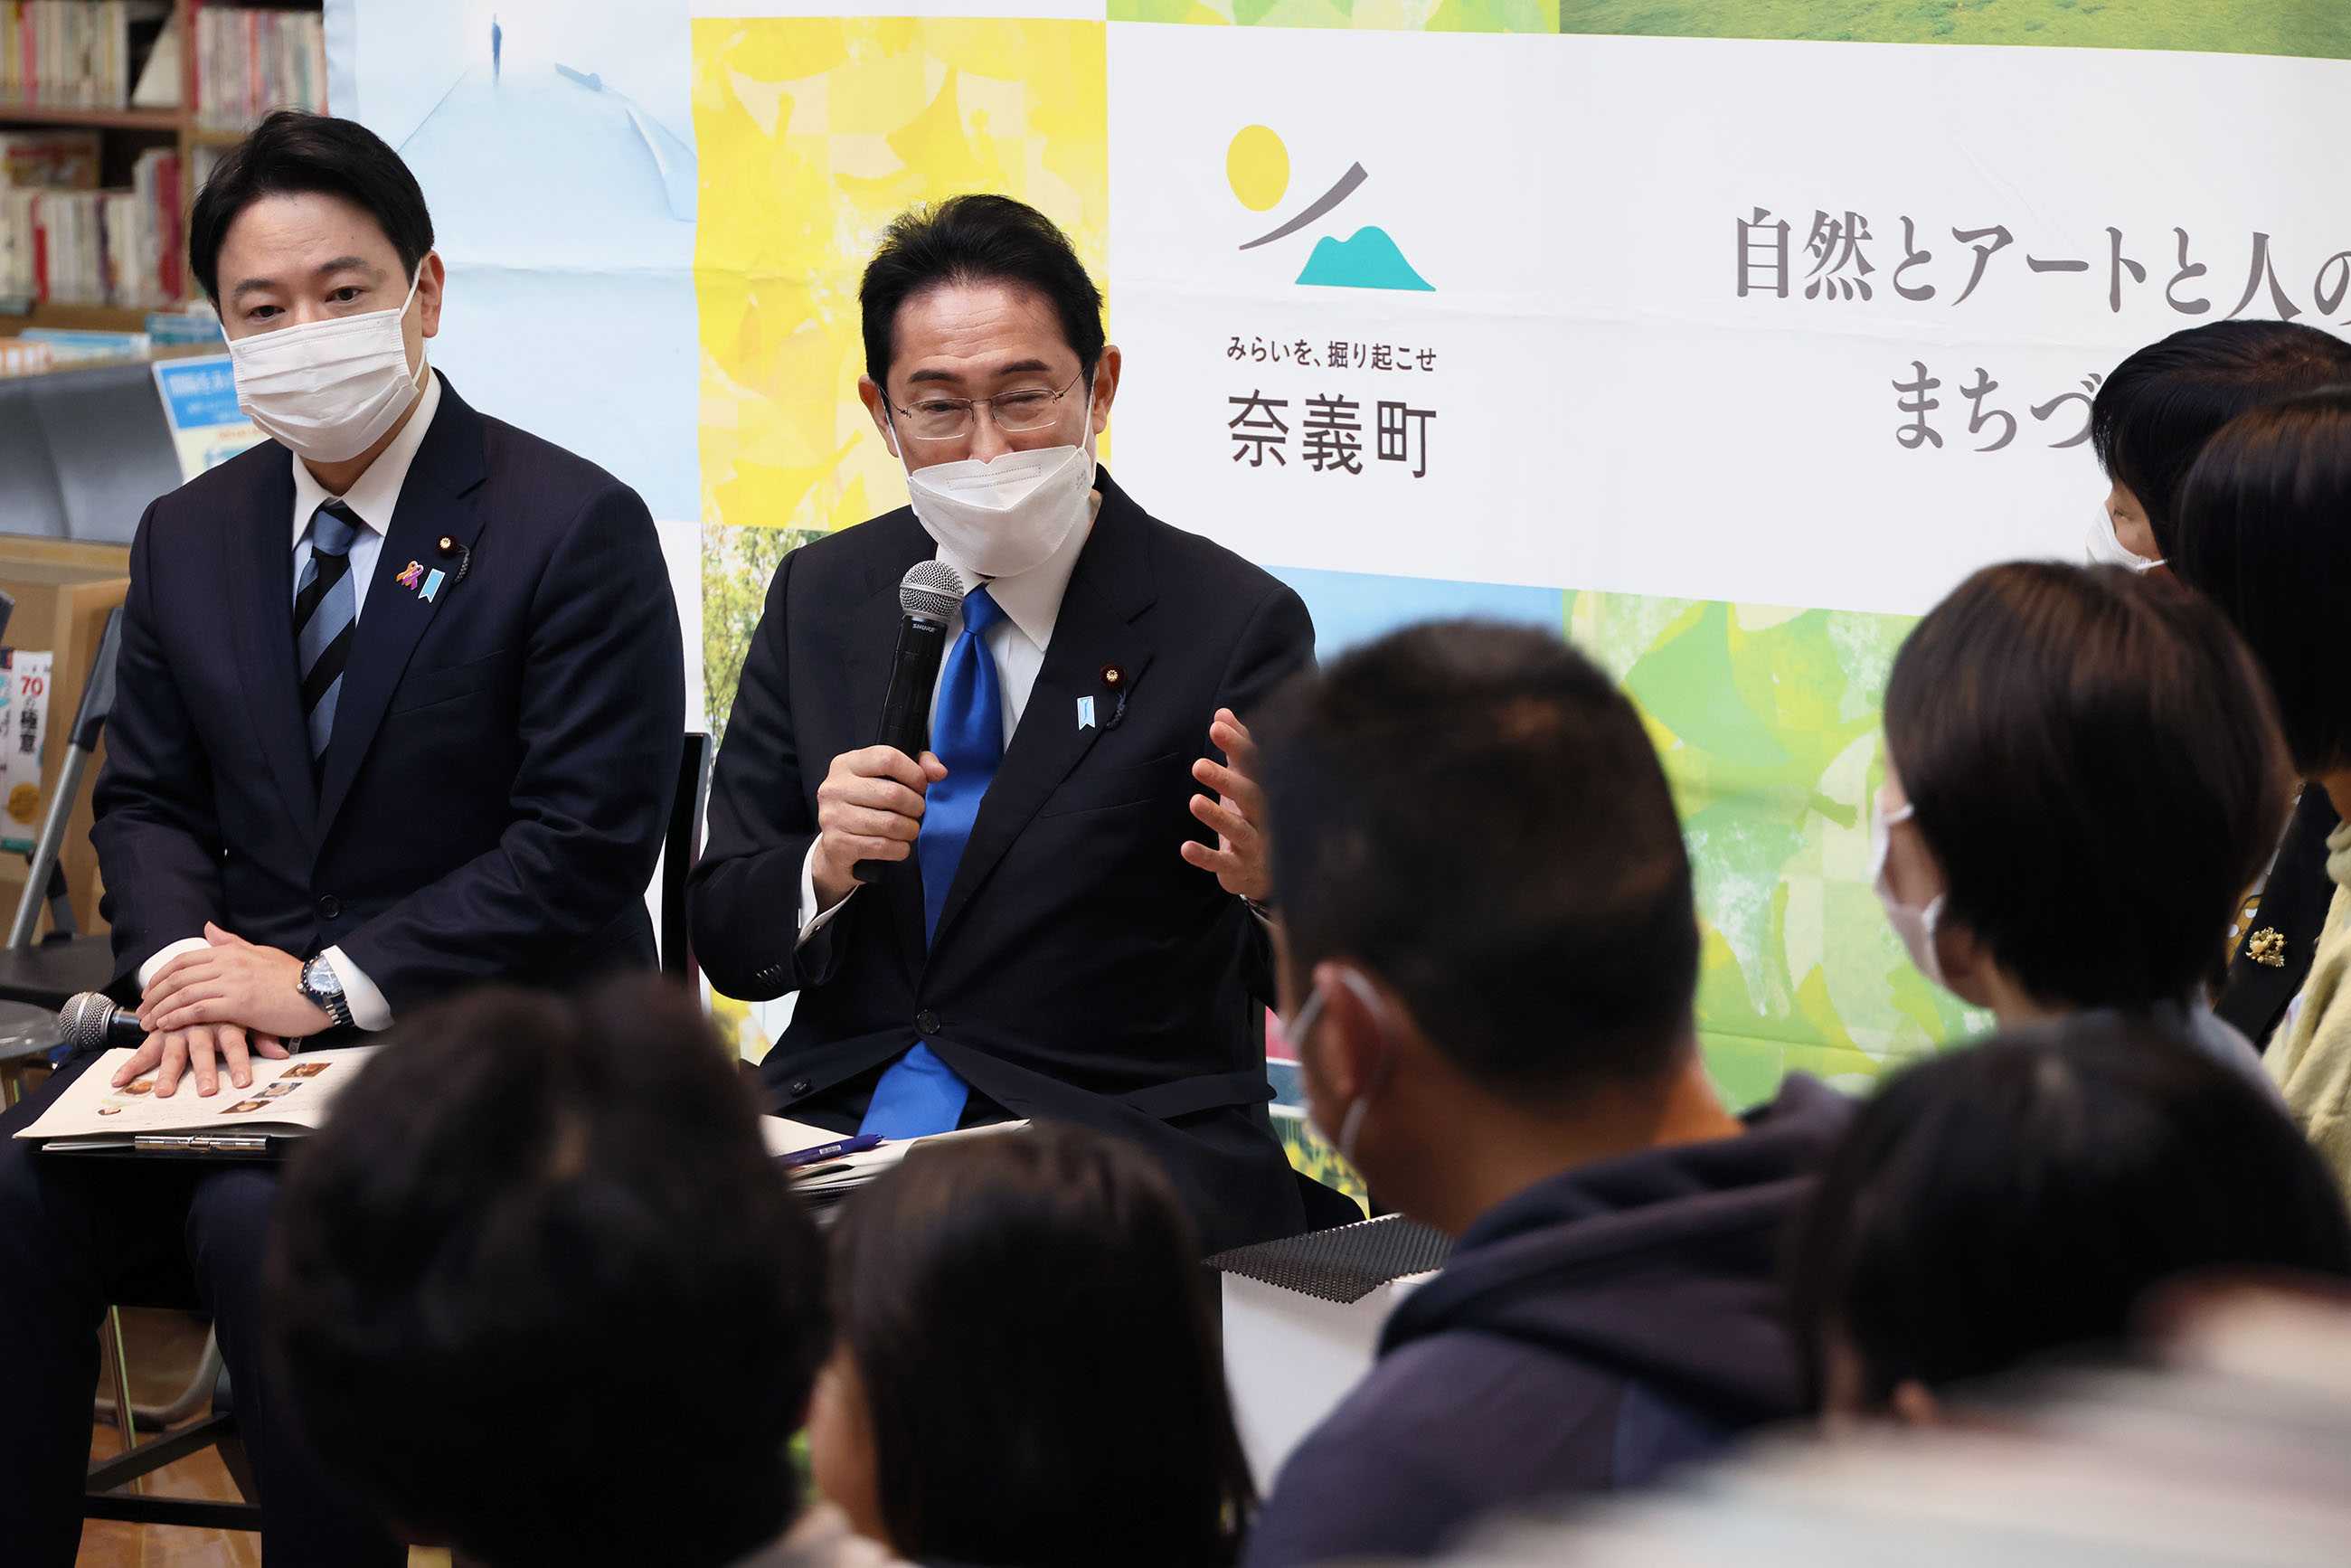 Prime Minster Kishida talking with participants in a public dialogue on policies related to children (4)